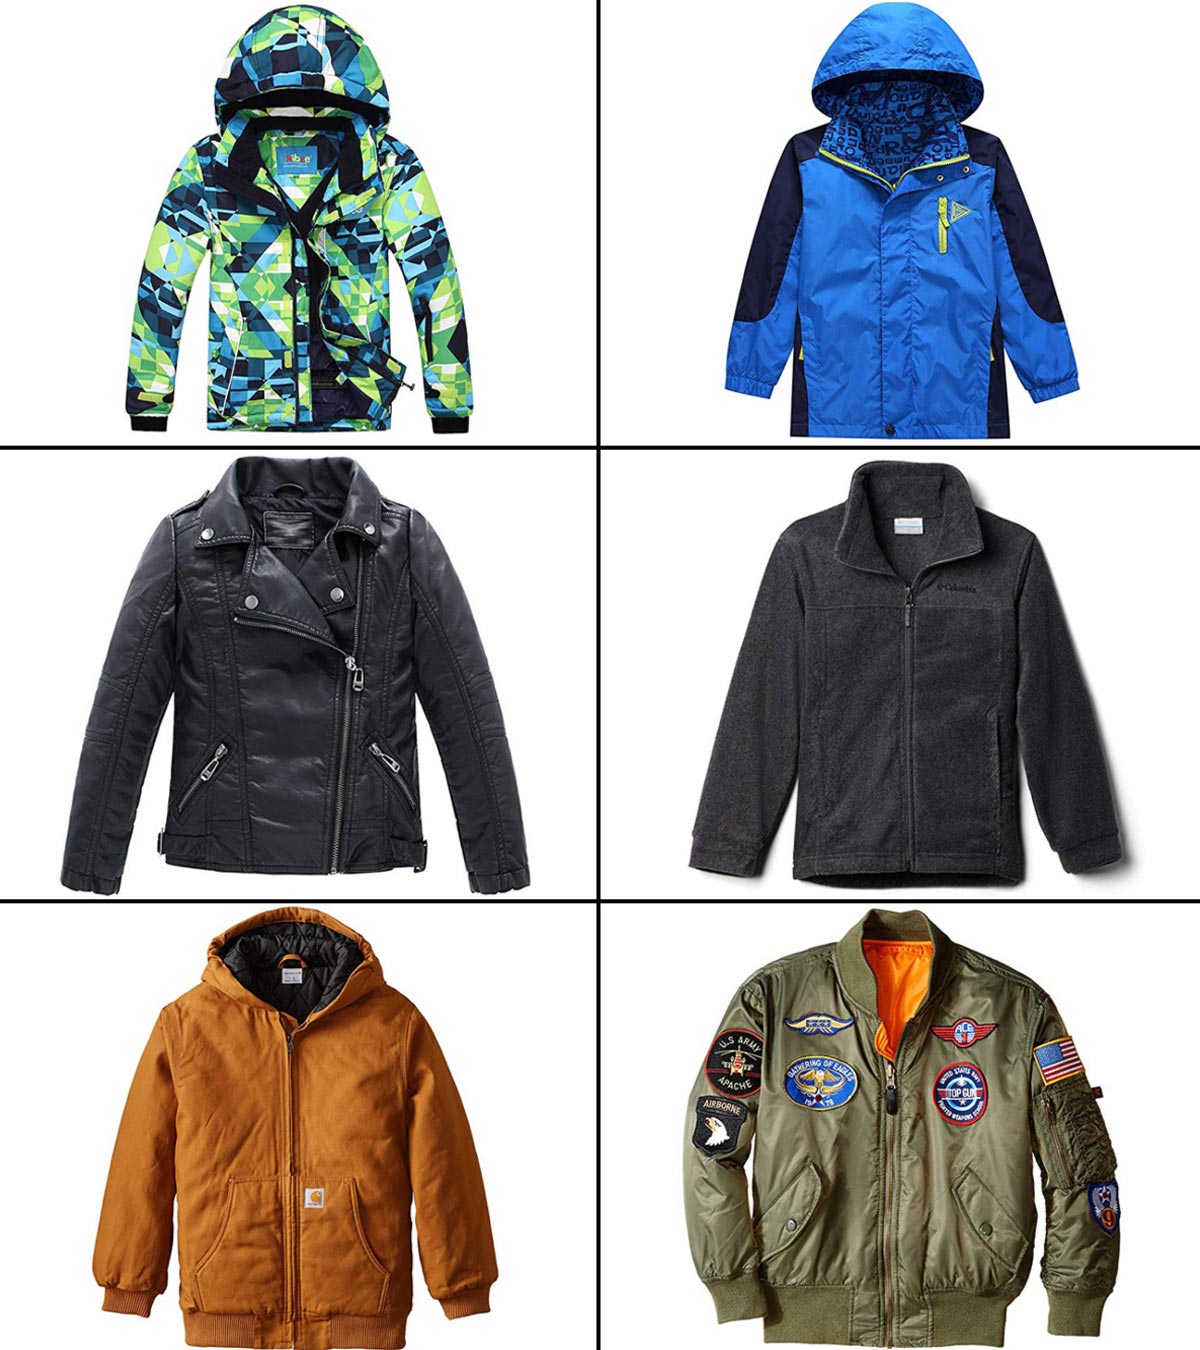 15 Best Jackets For Boys To Buy In 2021